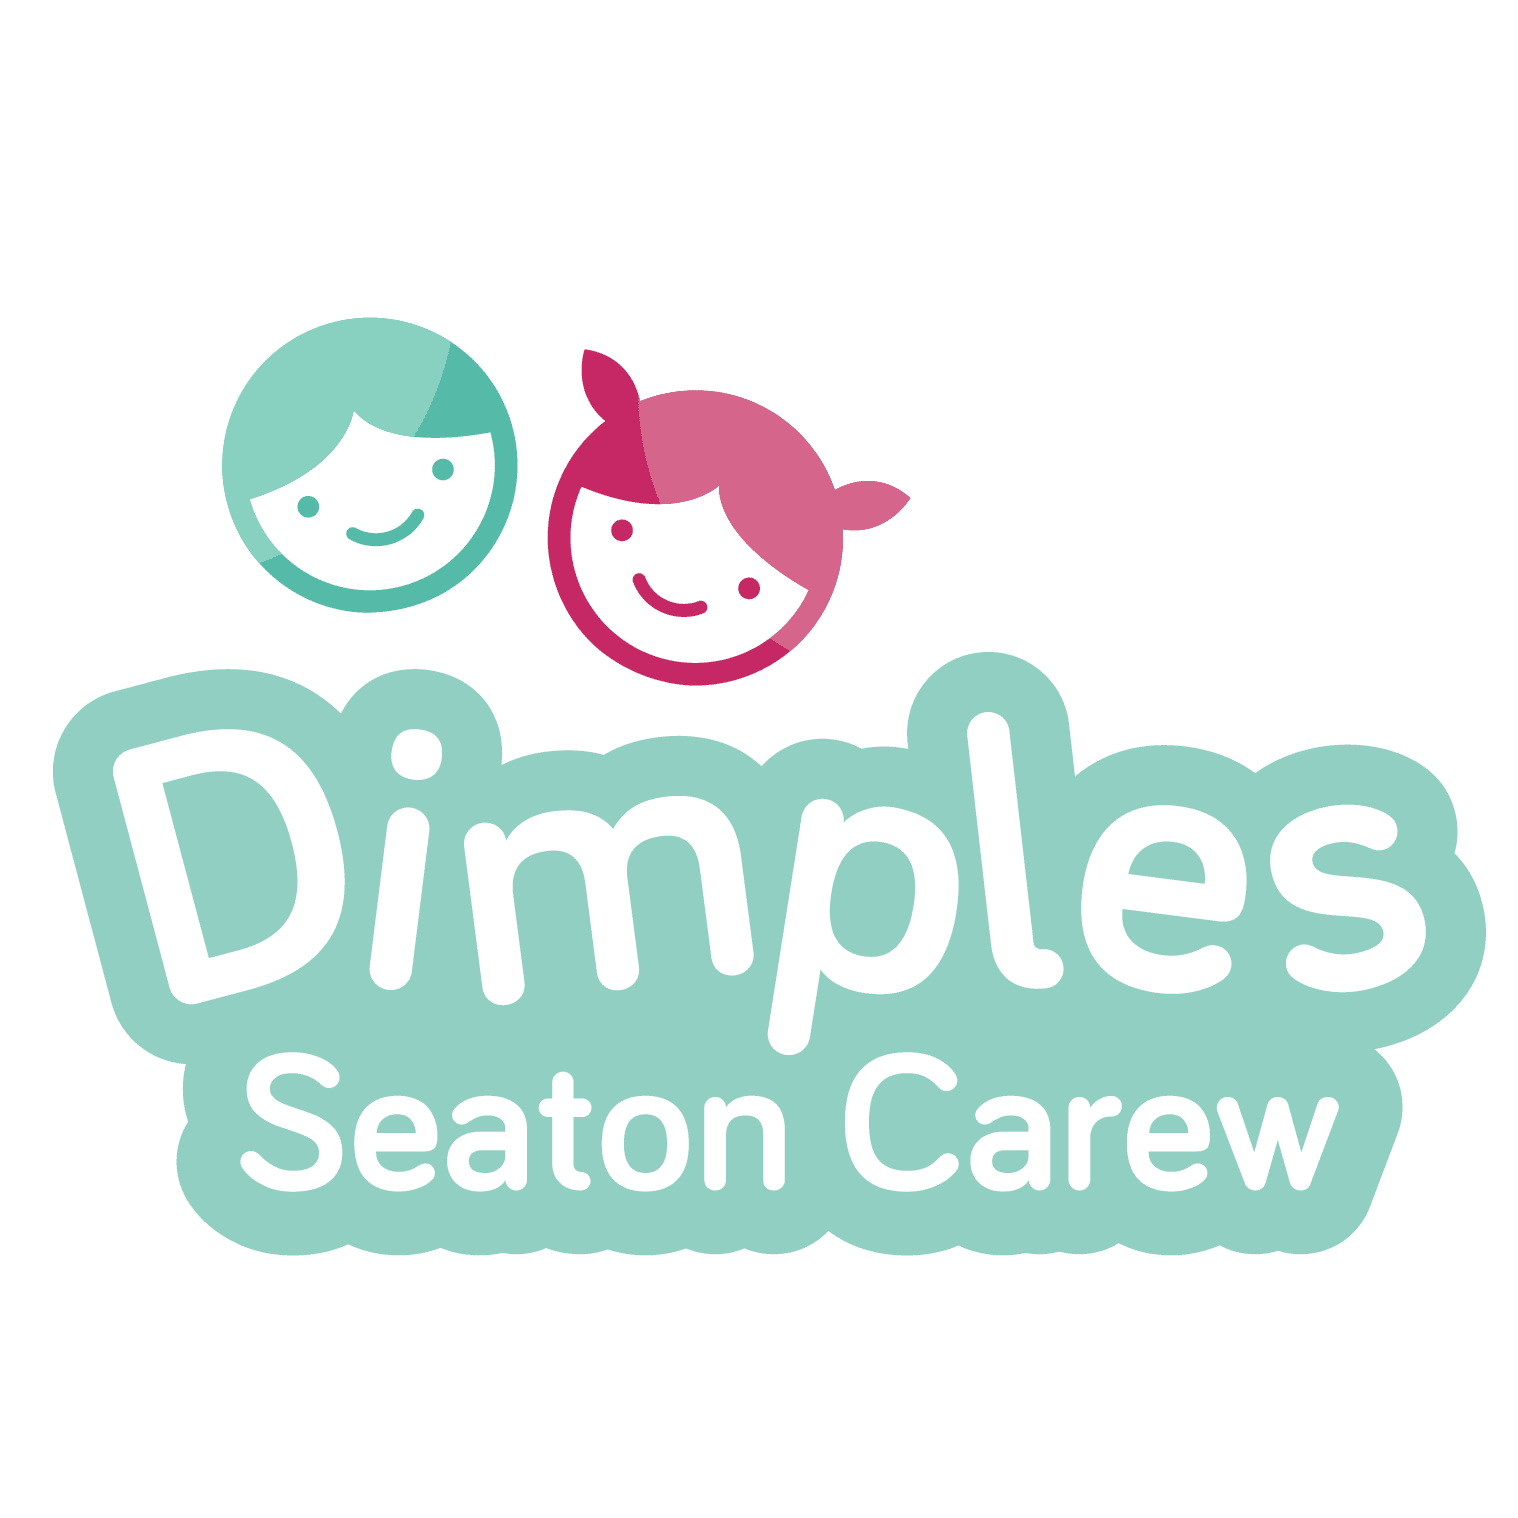 Dimples Seaton Carew Day Nursery - Hartlepool, North Yorkshire TS25 1EZ - 01429 866100 | ShowMeLocal.com